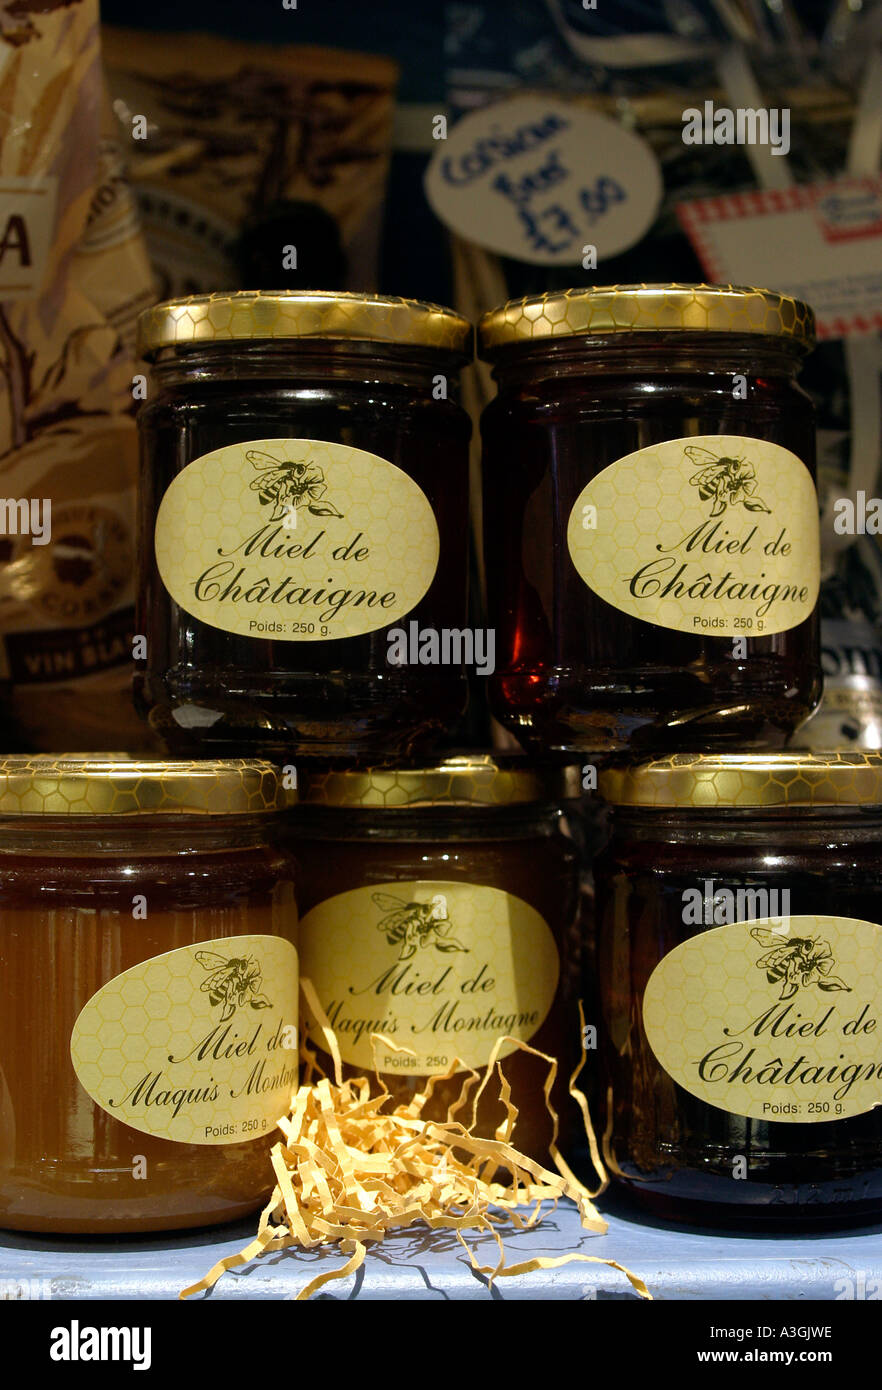 French Honey Miel de Maquis Mantagne Miel de chataigne French Living shop and café owned by Louise and Stephane Luiggi Stock Photo